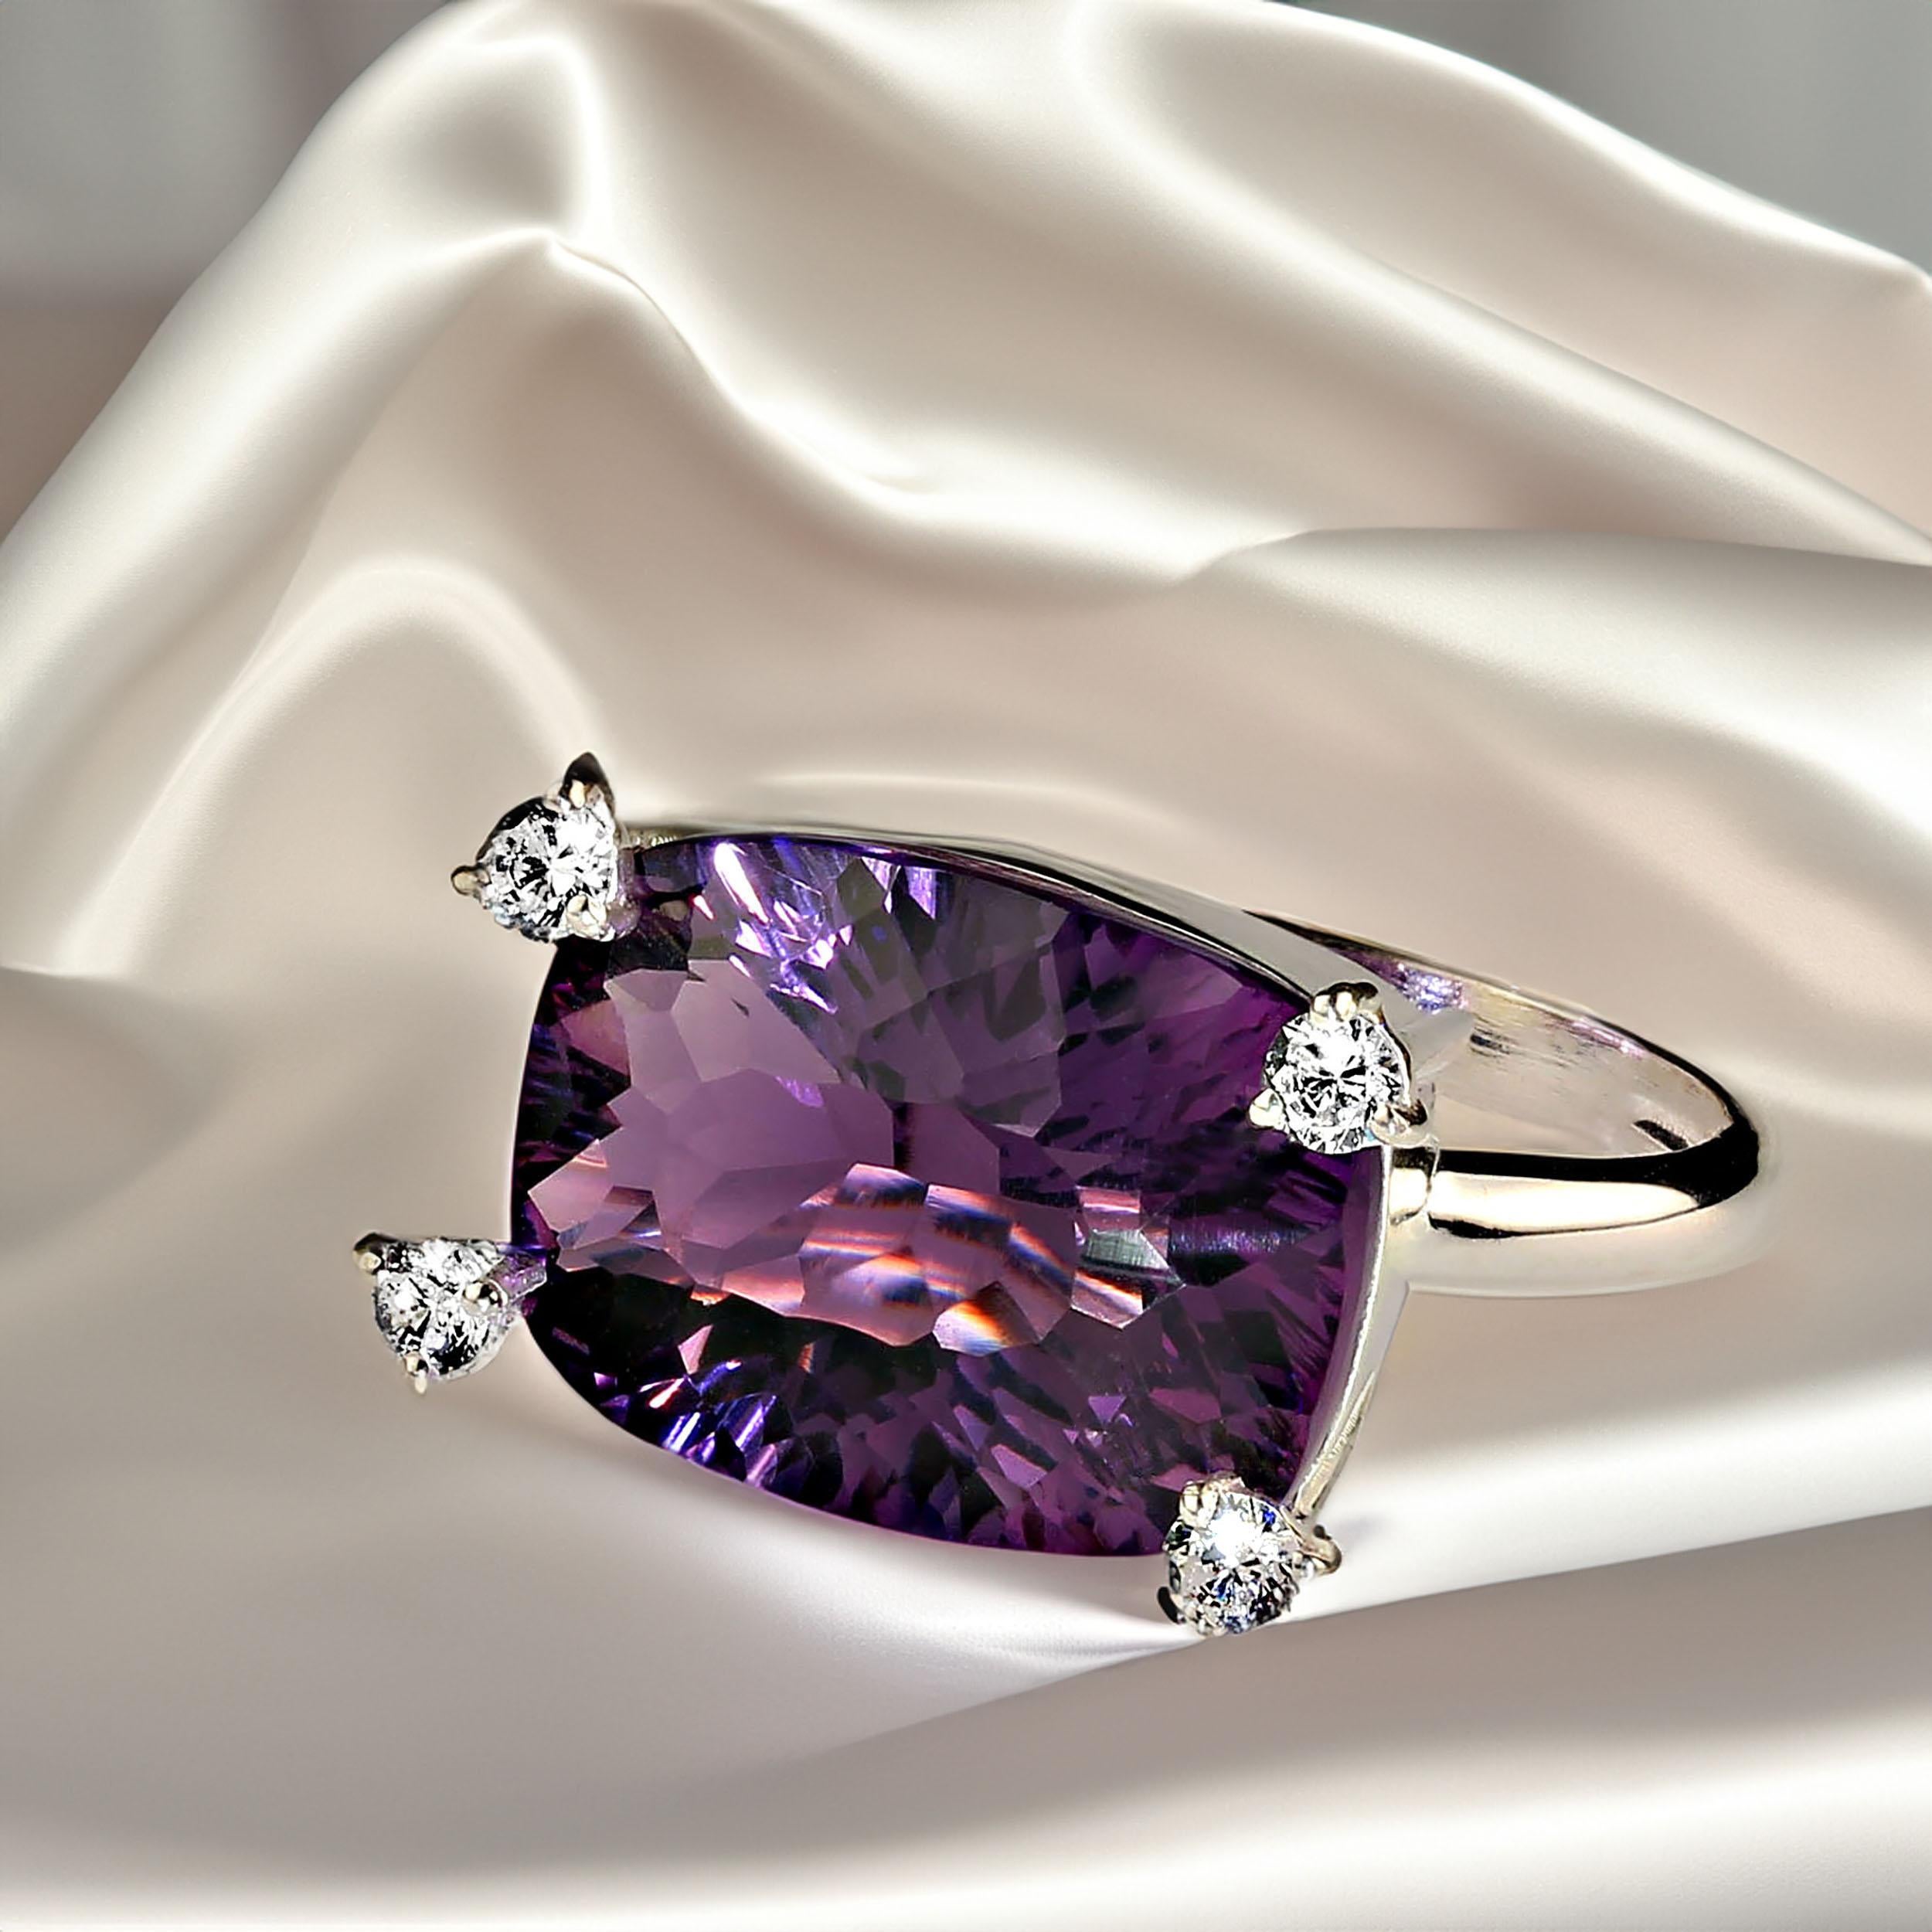 Contemporary ring of special cut Amethyst that has amazing sparkle and four highly set scintallating white zircons.  The zircons cover each corner of the east-west set rectangular amethyst, 13.70ct. The zircons are 0.60ct. The ring is sterling